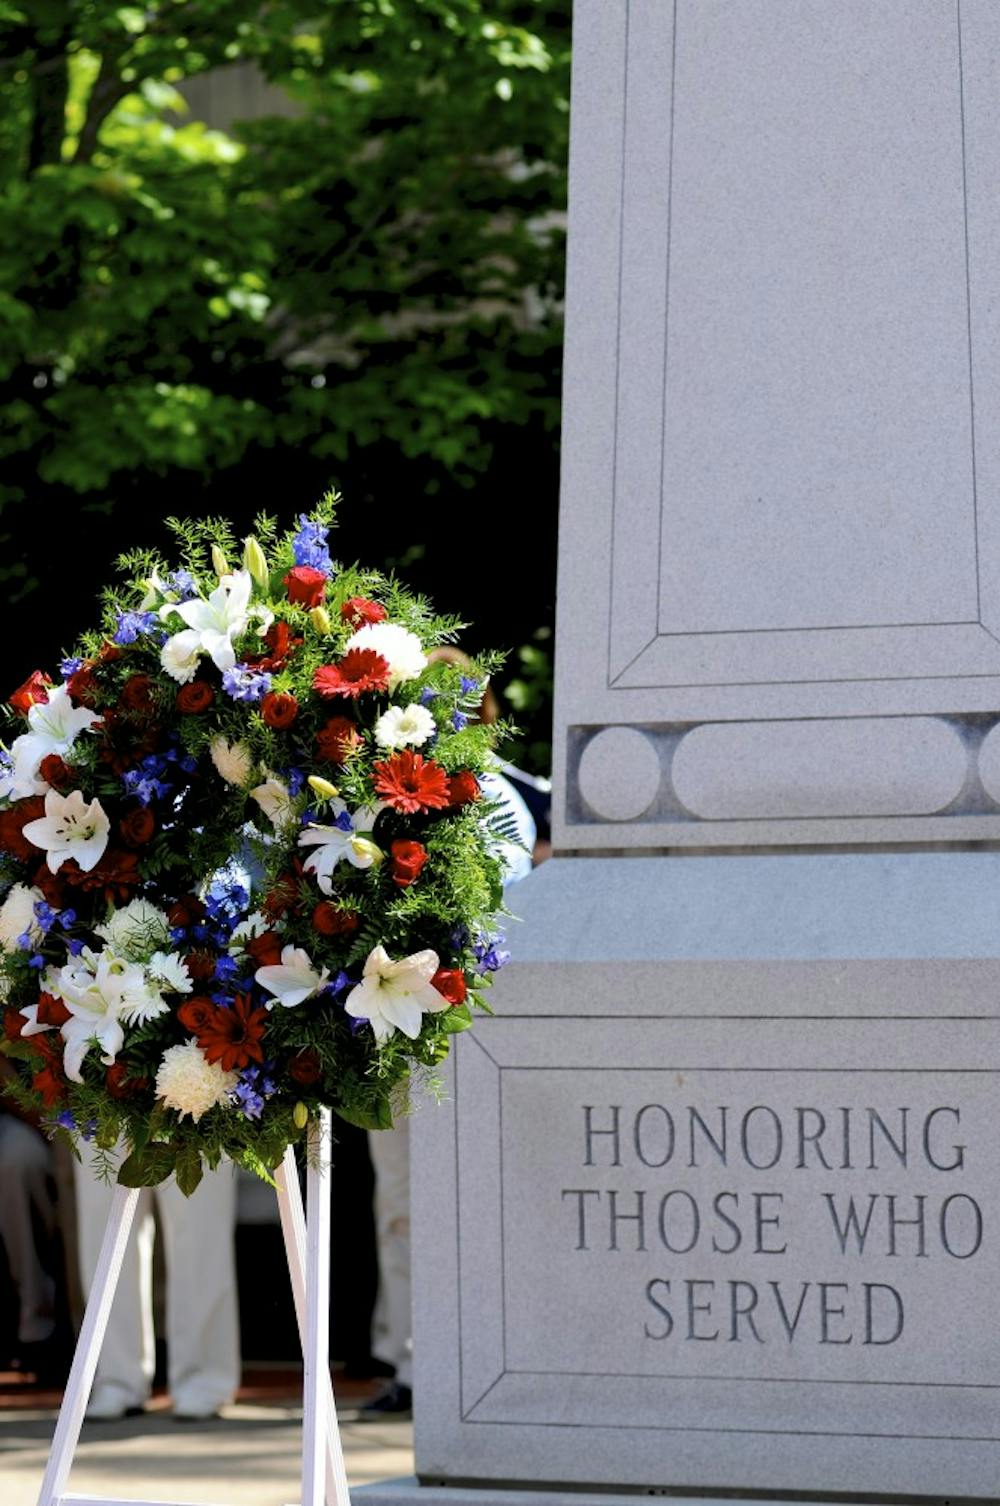 <p>A ceremonial wreath at Auburn Veterans Memorial&nbsp;during a Memorial Day Service on Monday, May 29, 2017 in Auburn, Ala.</p>